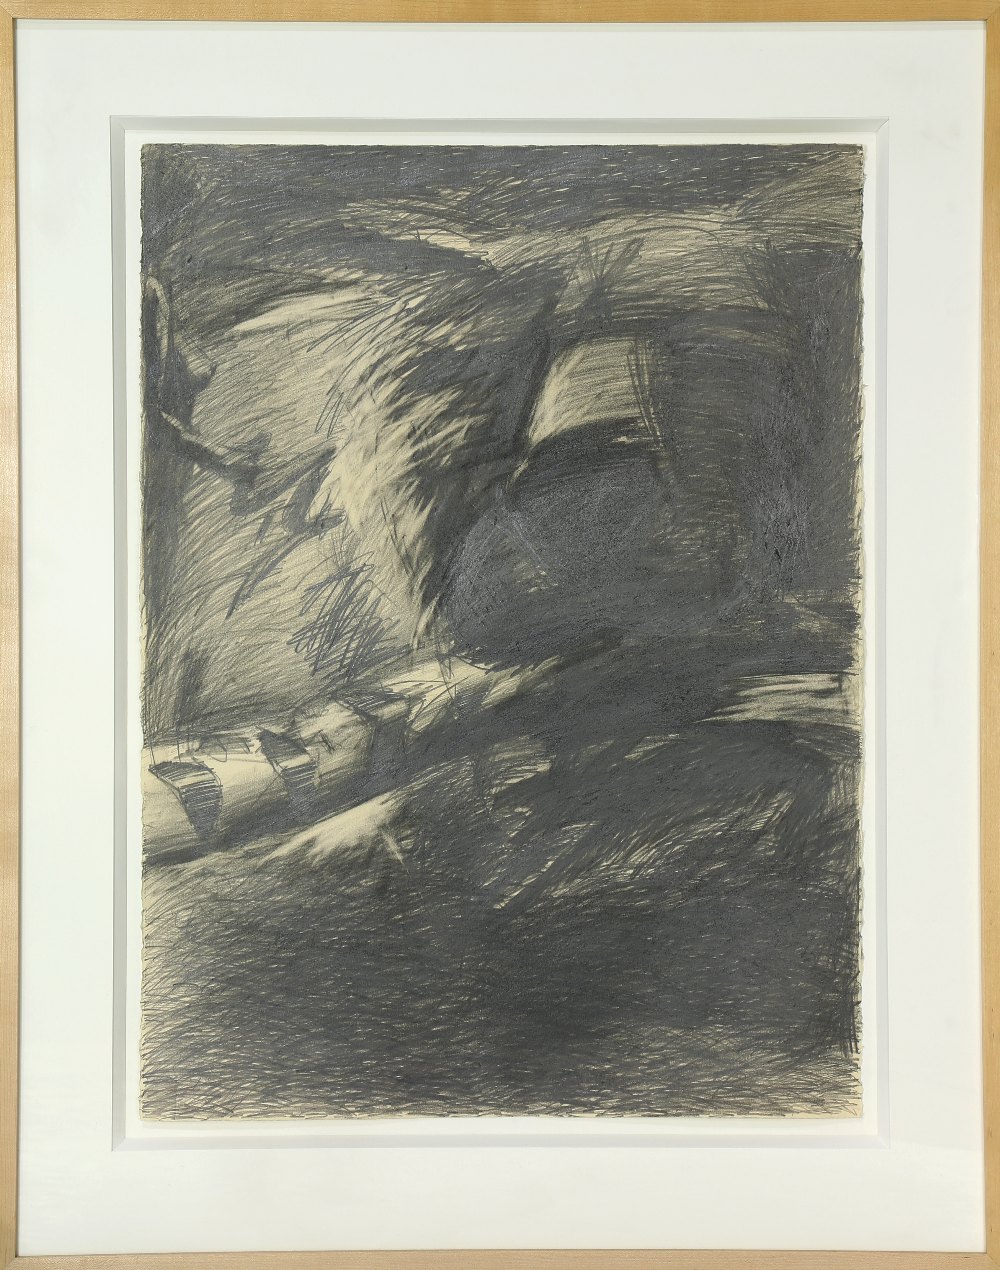 Ron Westman (American, 20th century), "Untitled (Dog with Stick in Mouth)" pencil on paper, - Image 2 of 4